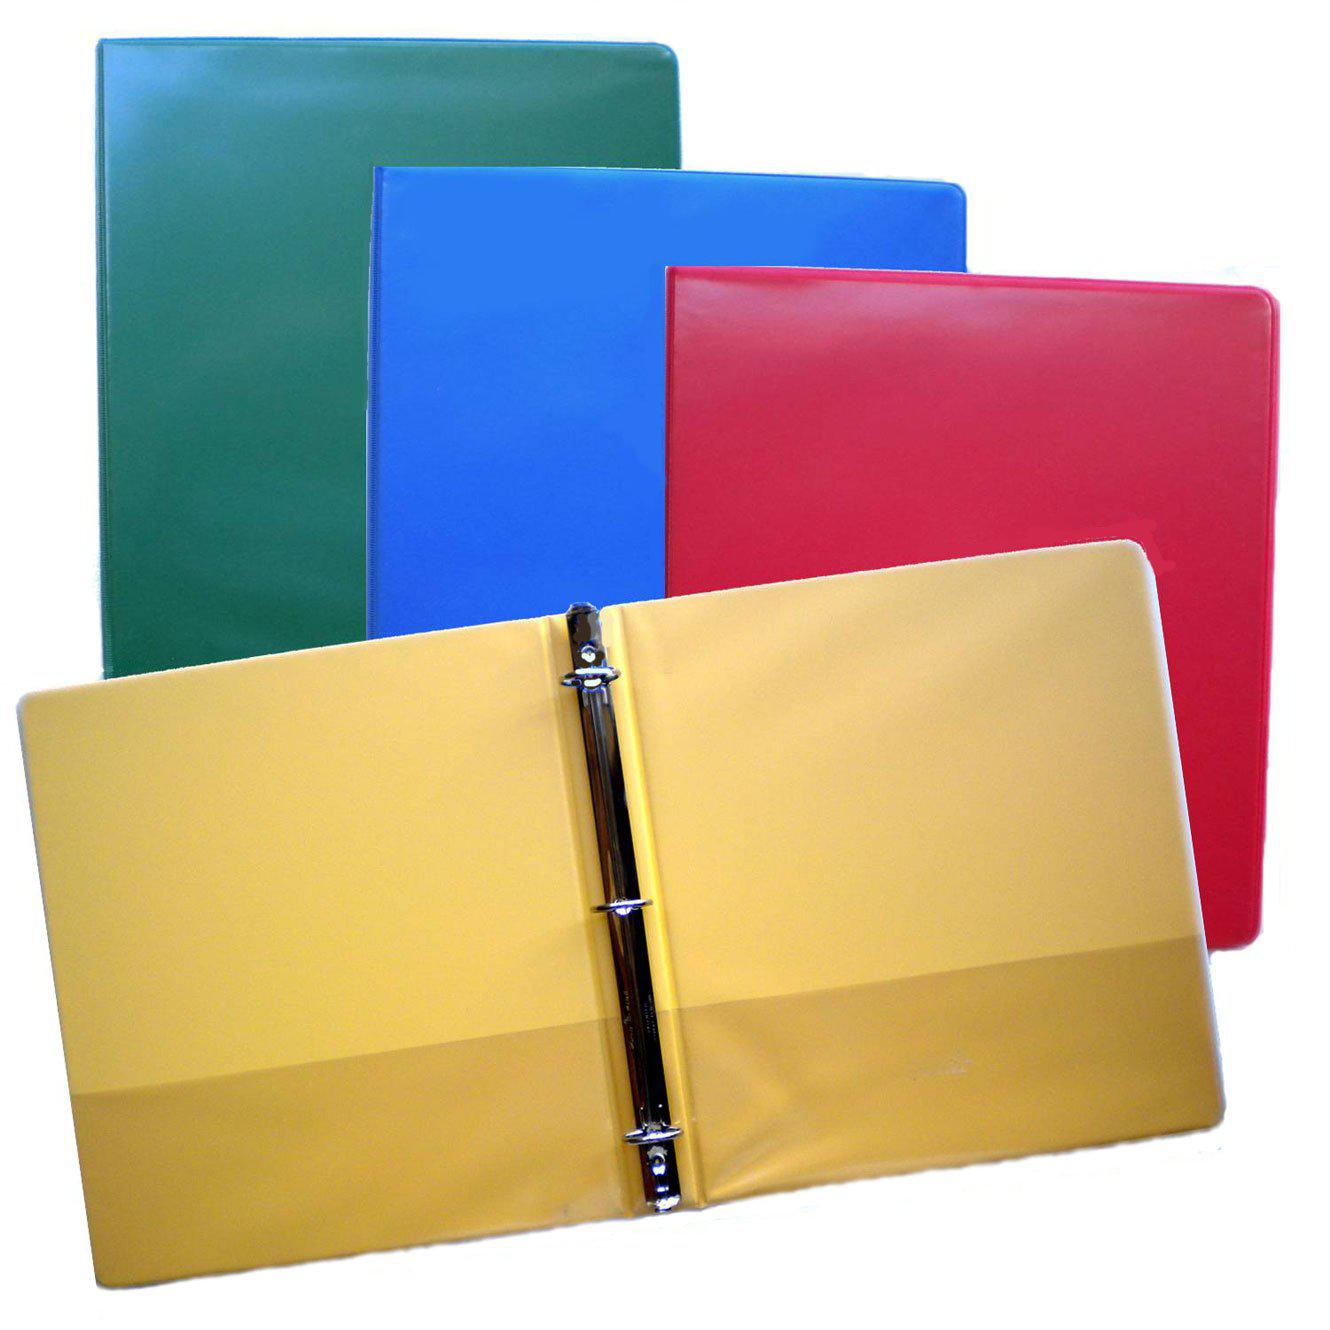 Value Binder 1.5" 3-ring view binders in assorted colors for 8.5" x 11" paper - box of 4 view binders